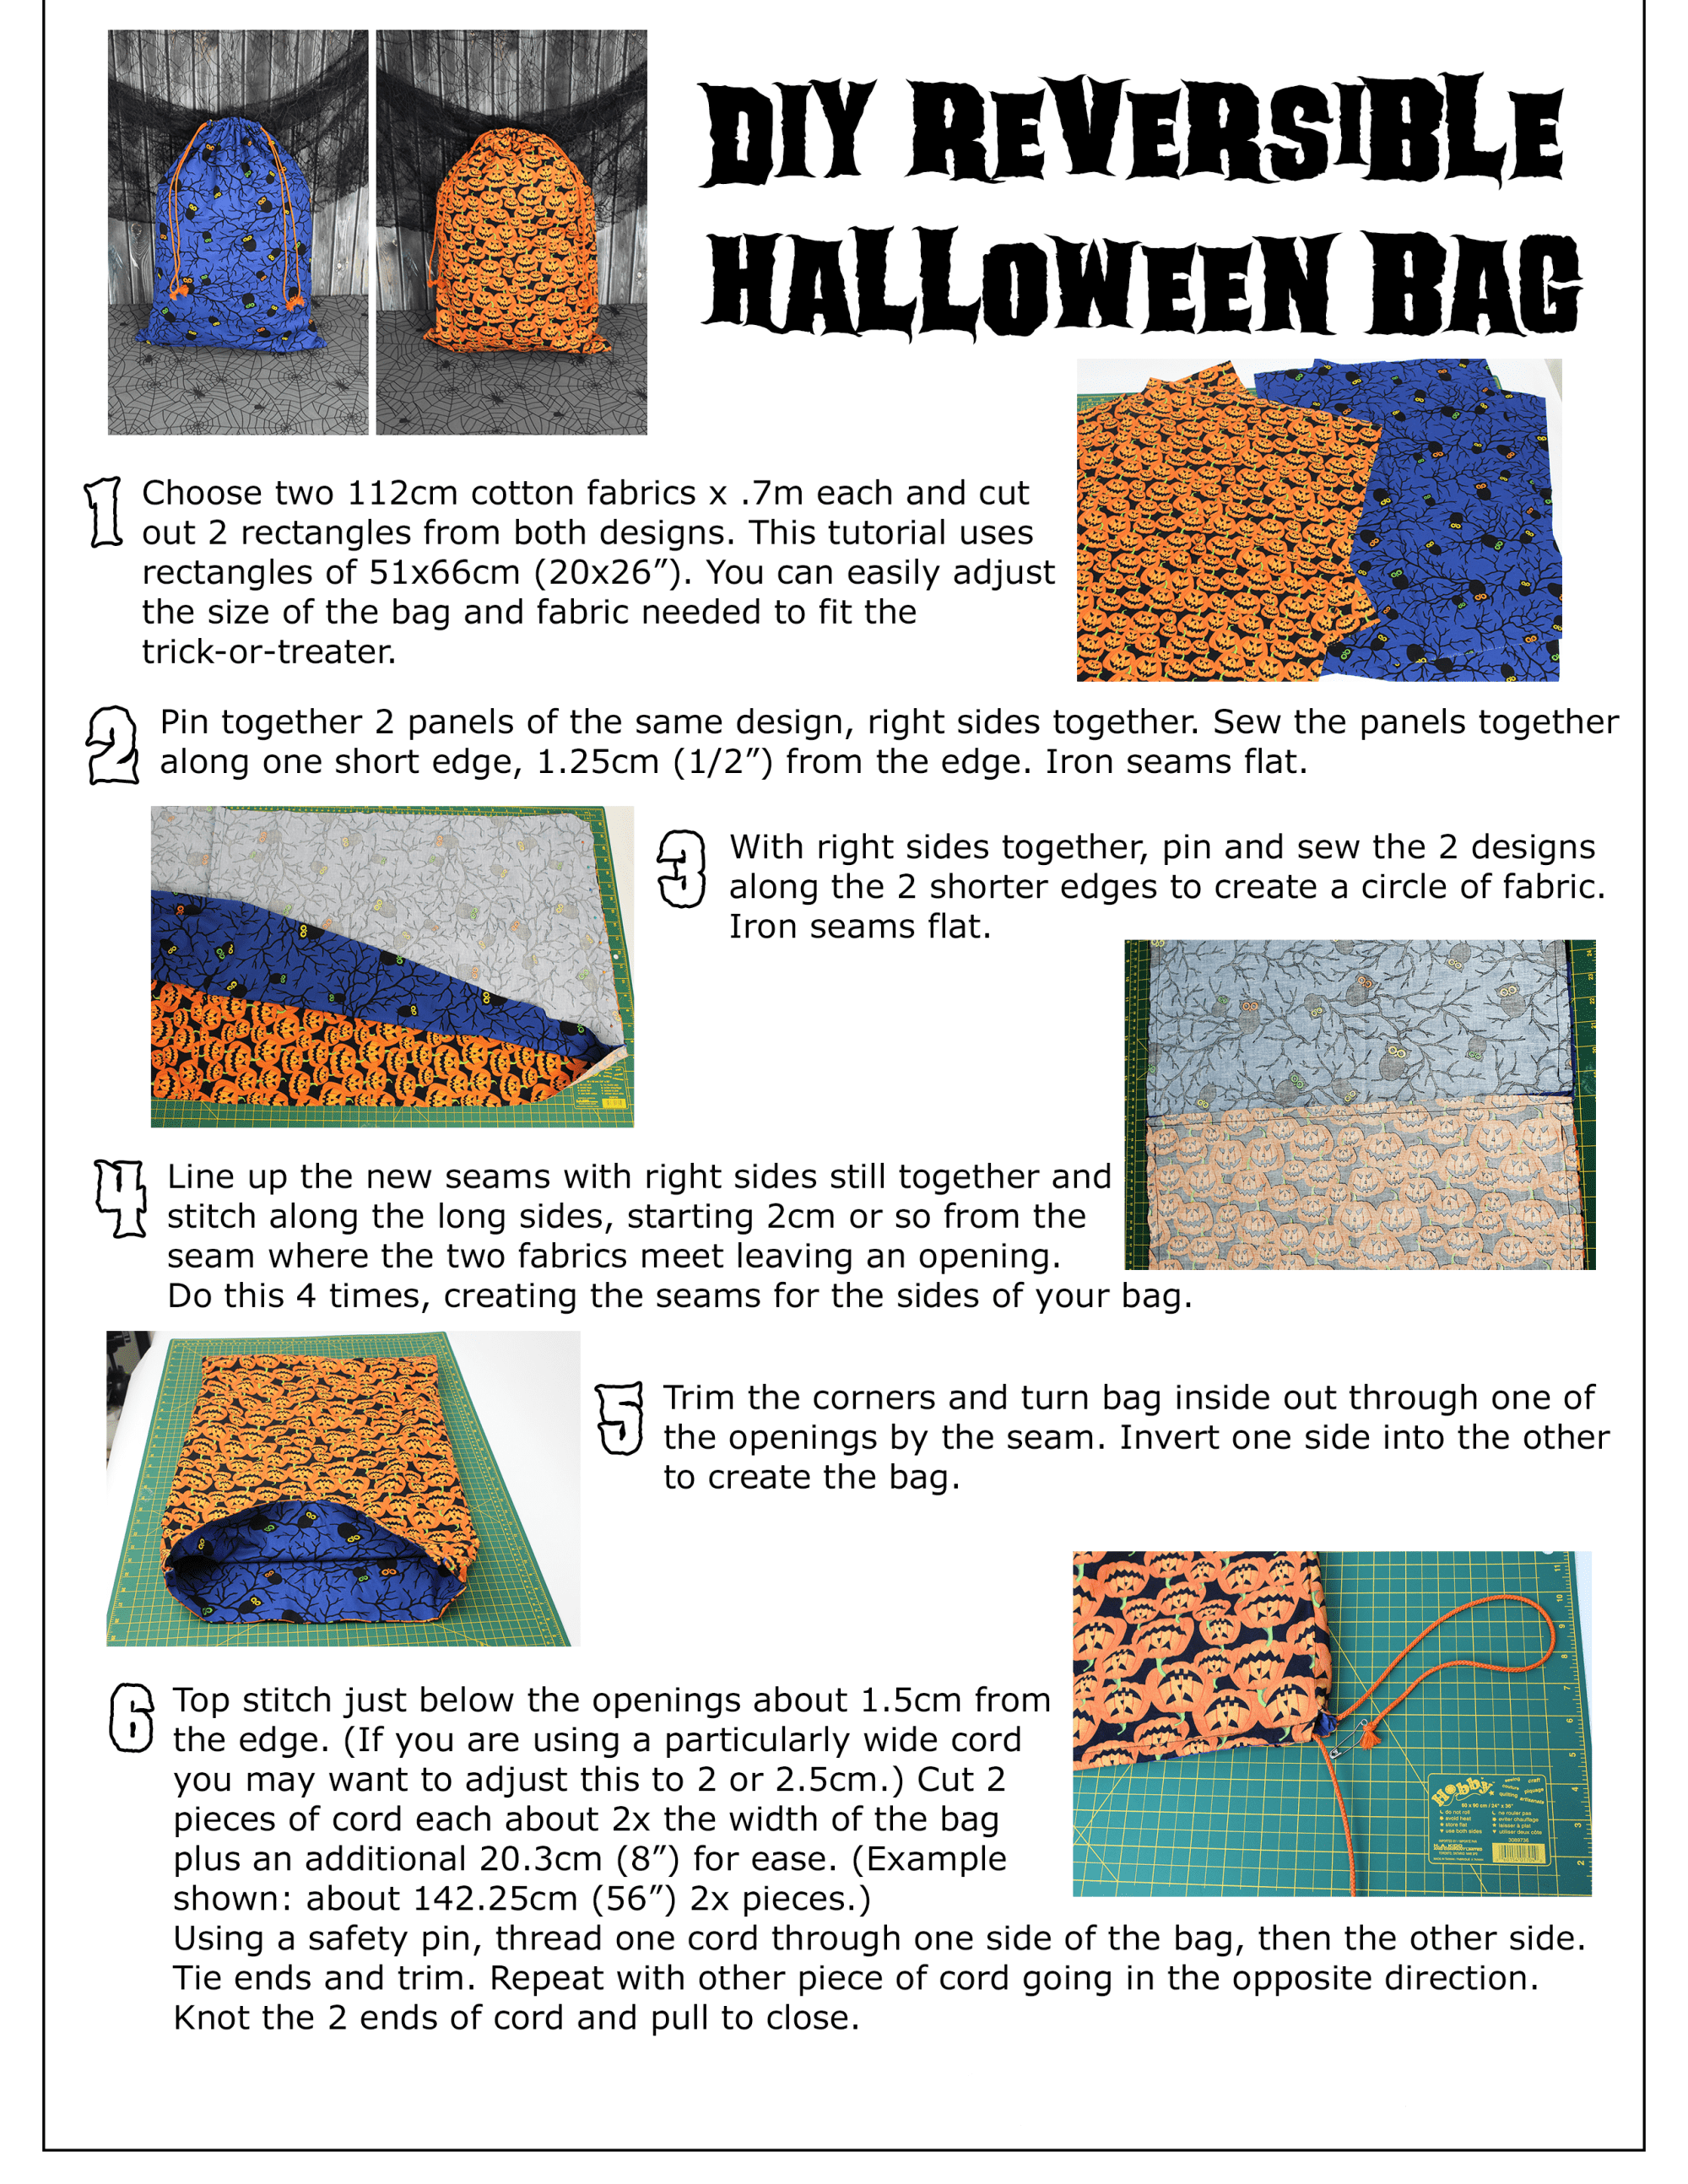 Steps to create your Halloween bags